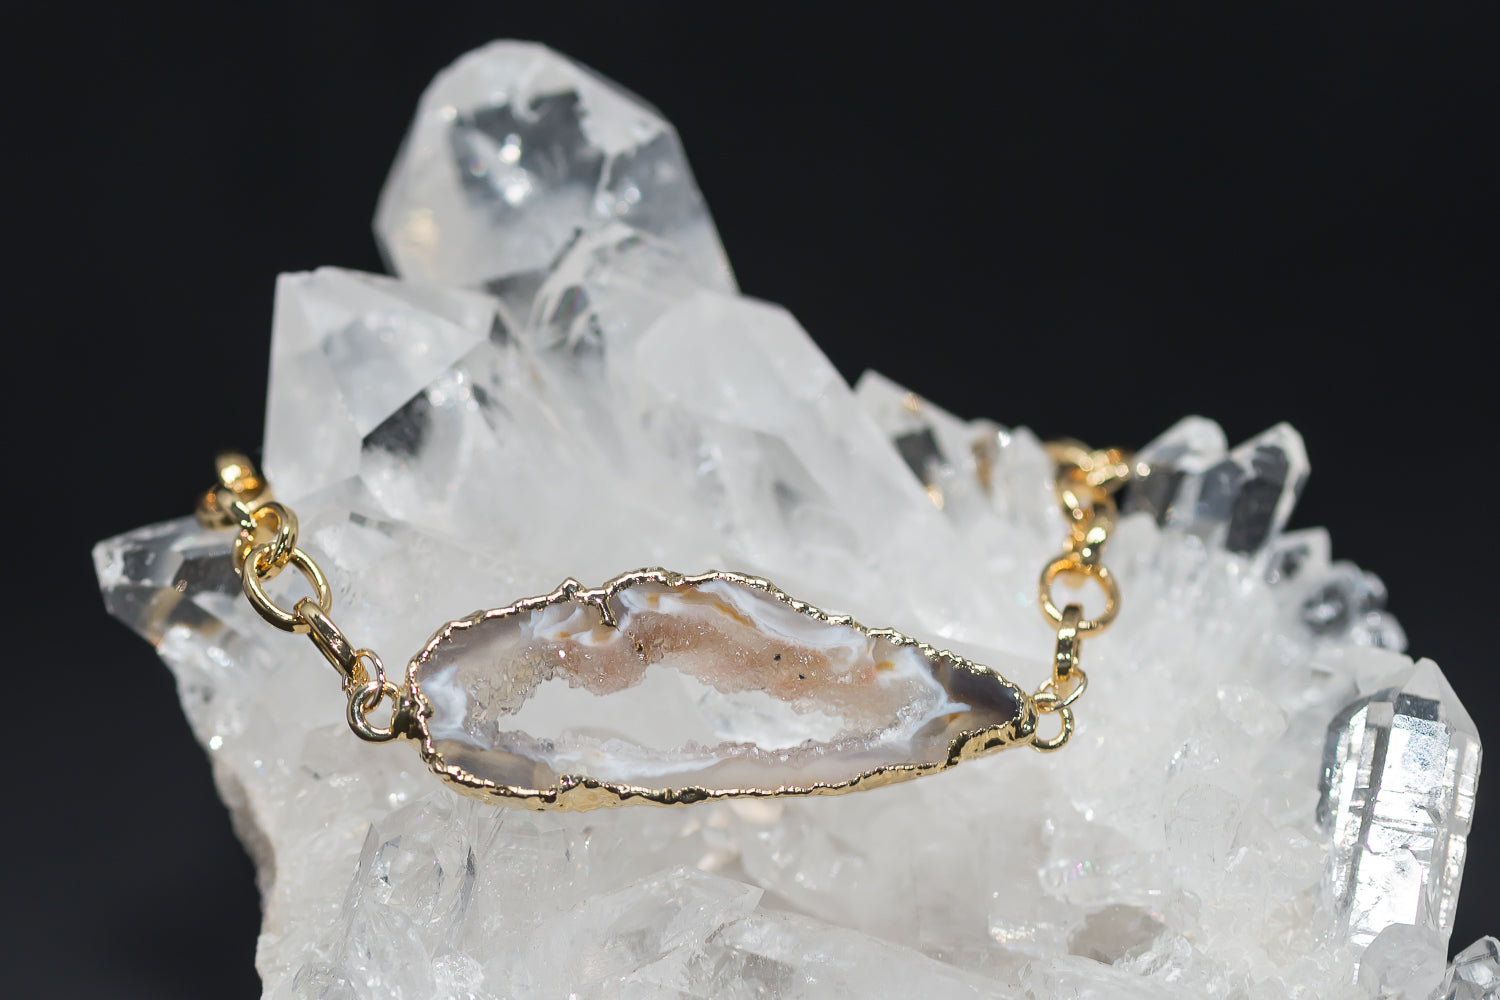 Druzy Agate Oco Geode Bracelet with 18k Gold Plated Chain